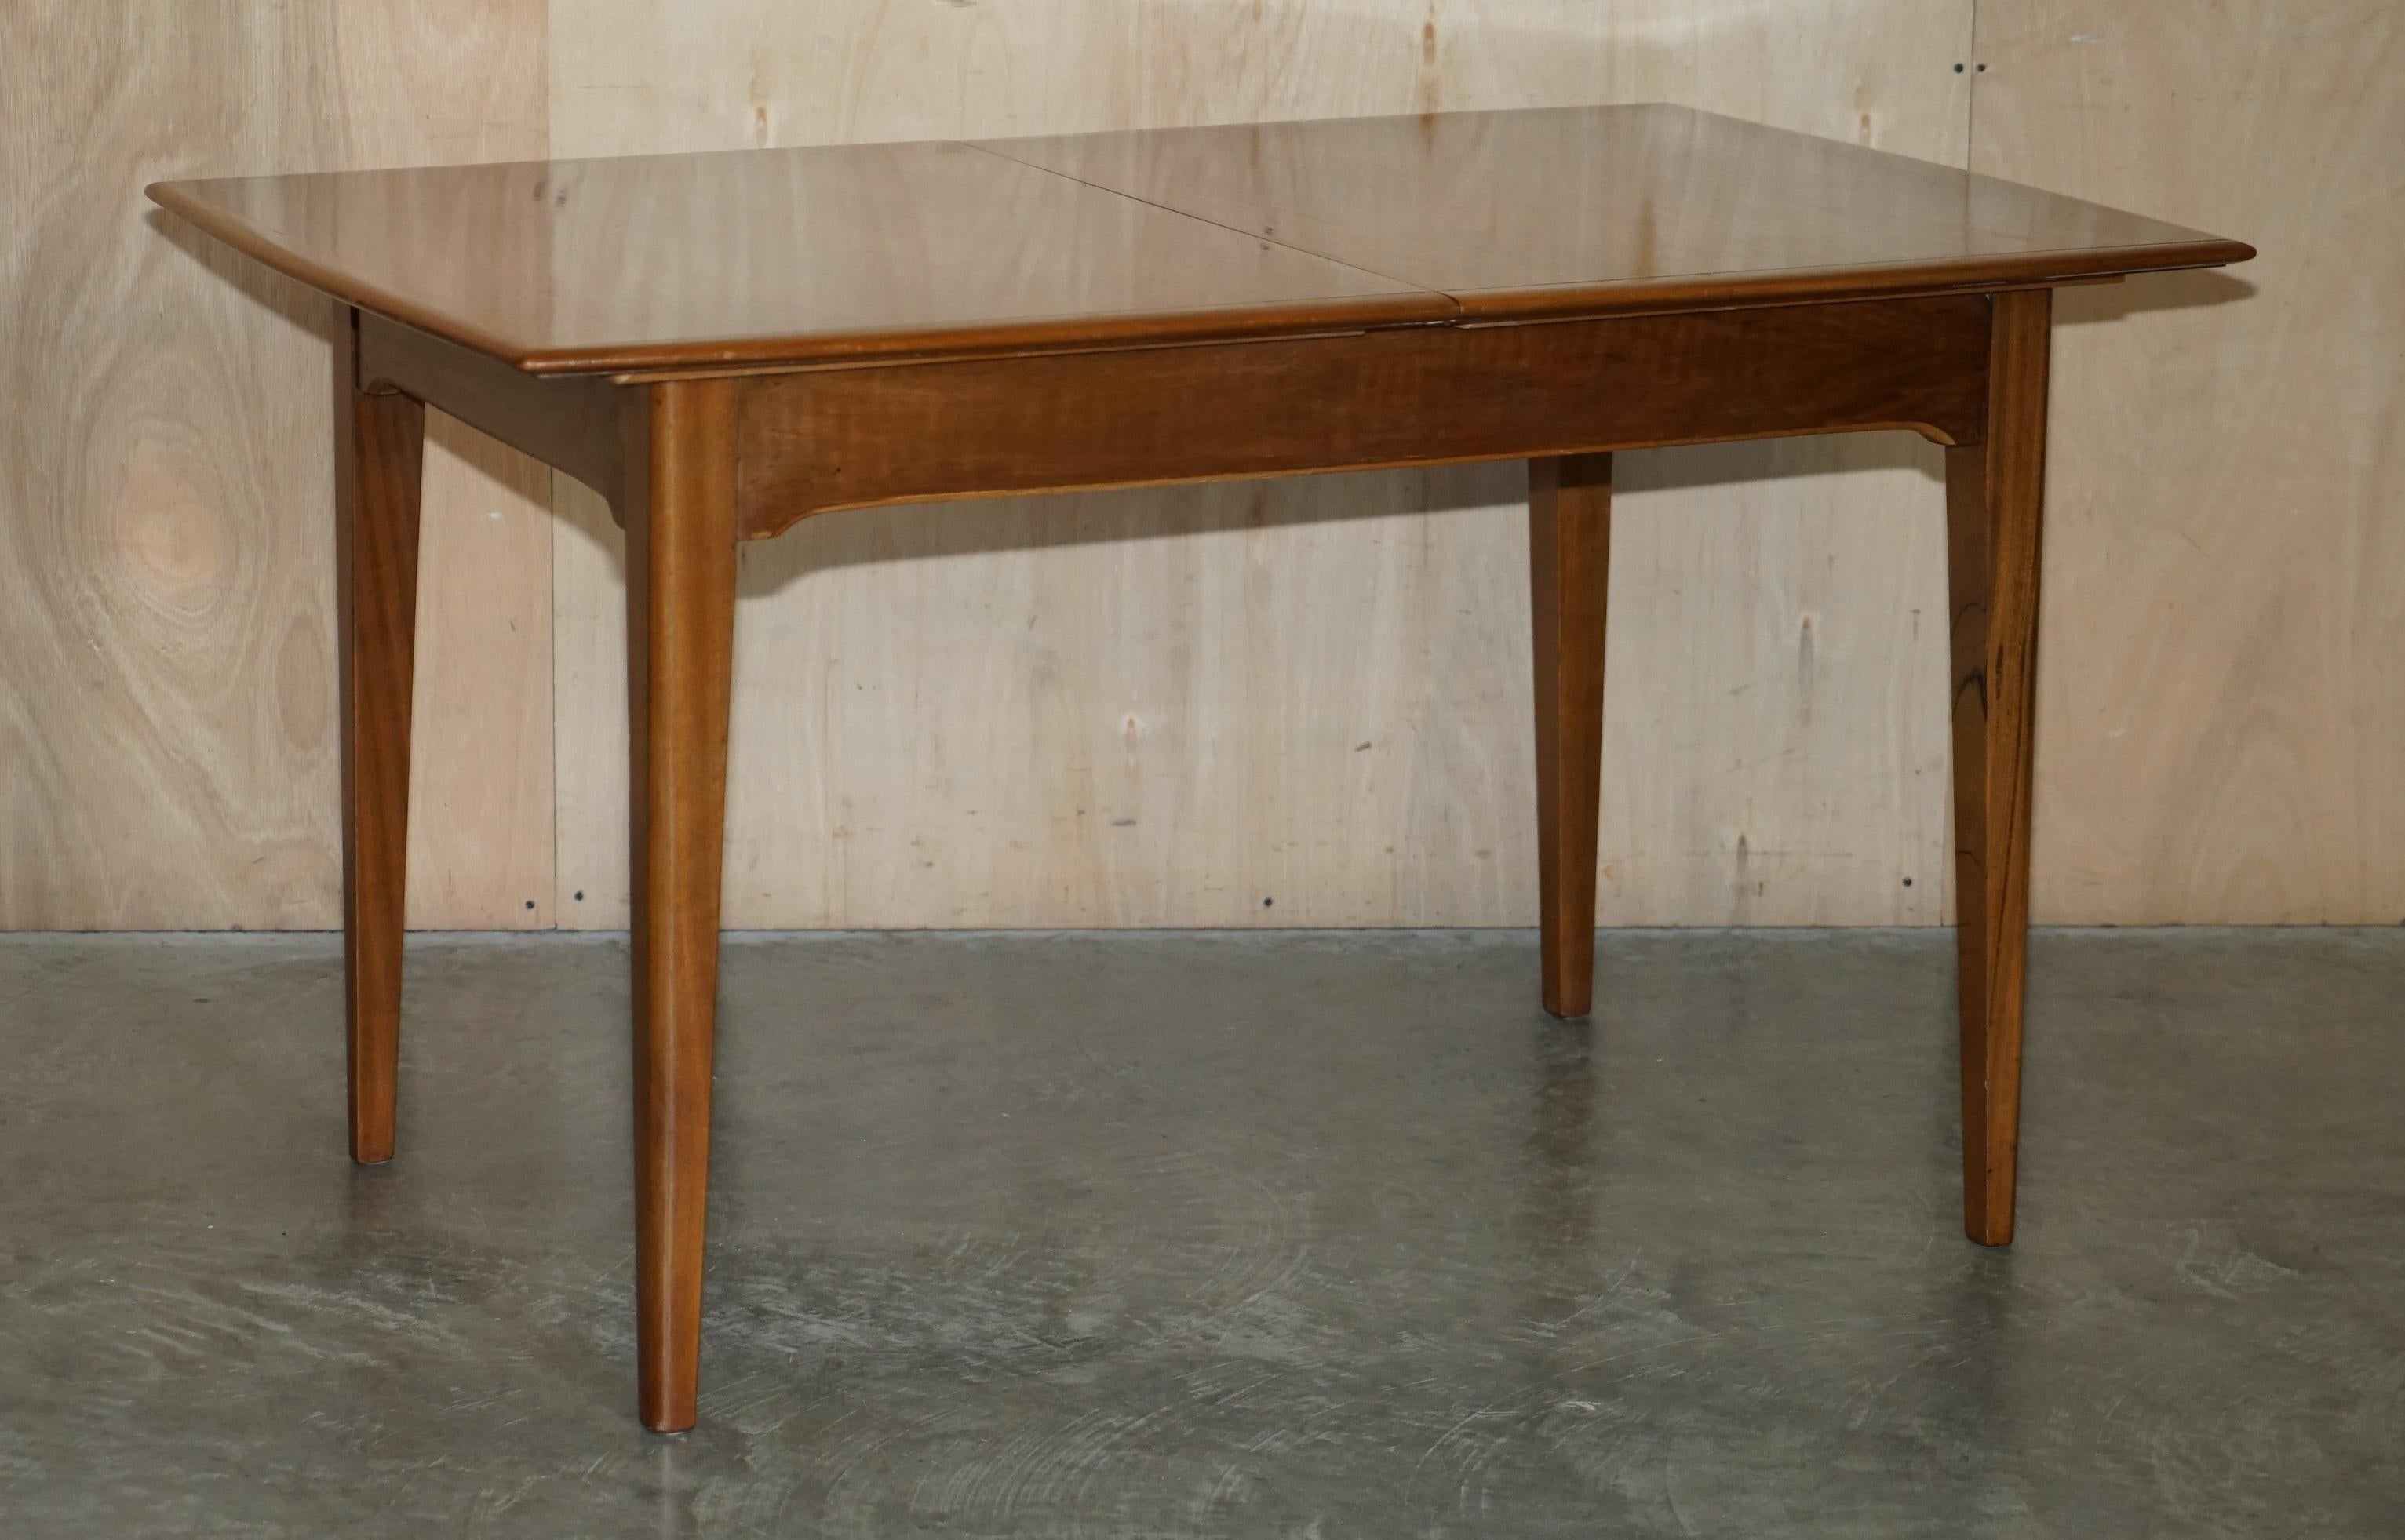 Royal House Antiques

Royal House Antiques is delighted to offer for sale this stunning fully restored, vintage Mid Century Modern, Arne Hovmand-Olsen for Mogen Kold, extending dining table 

Please note the delivery fee listed is just a guide, it